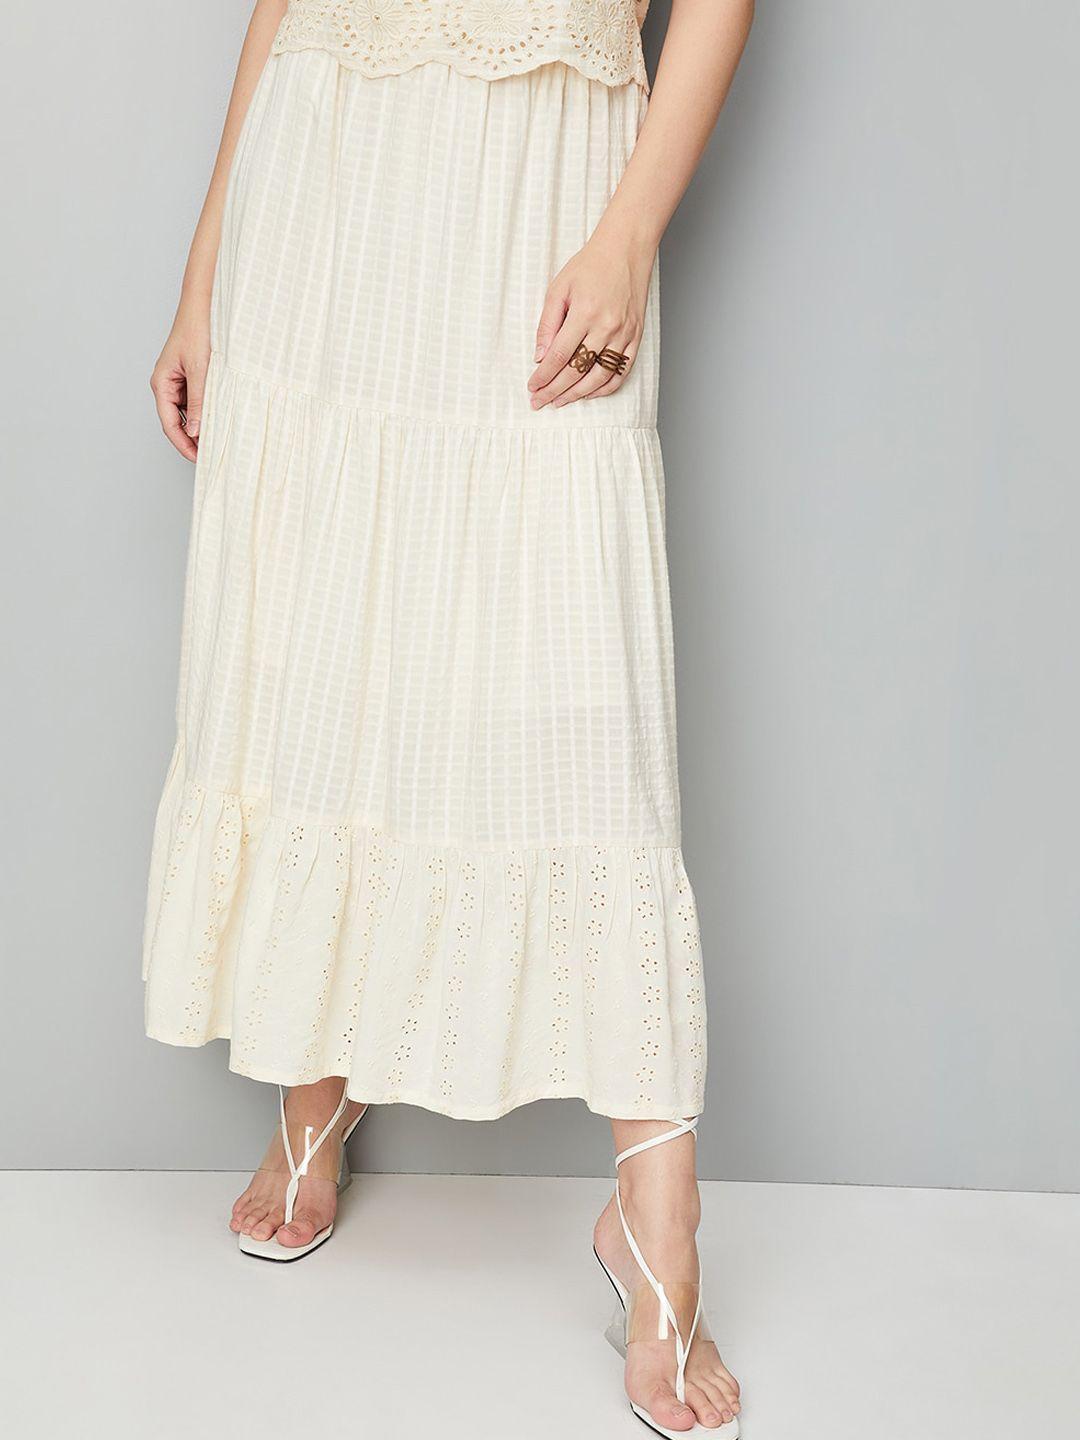 max-checked-pure-cotton-maxi-tiered-skirt